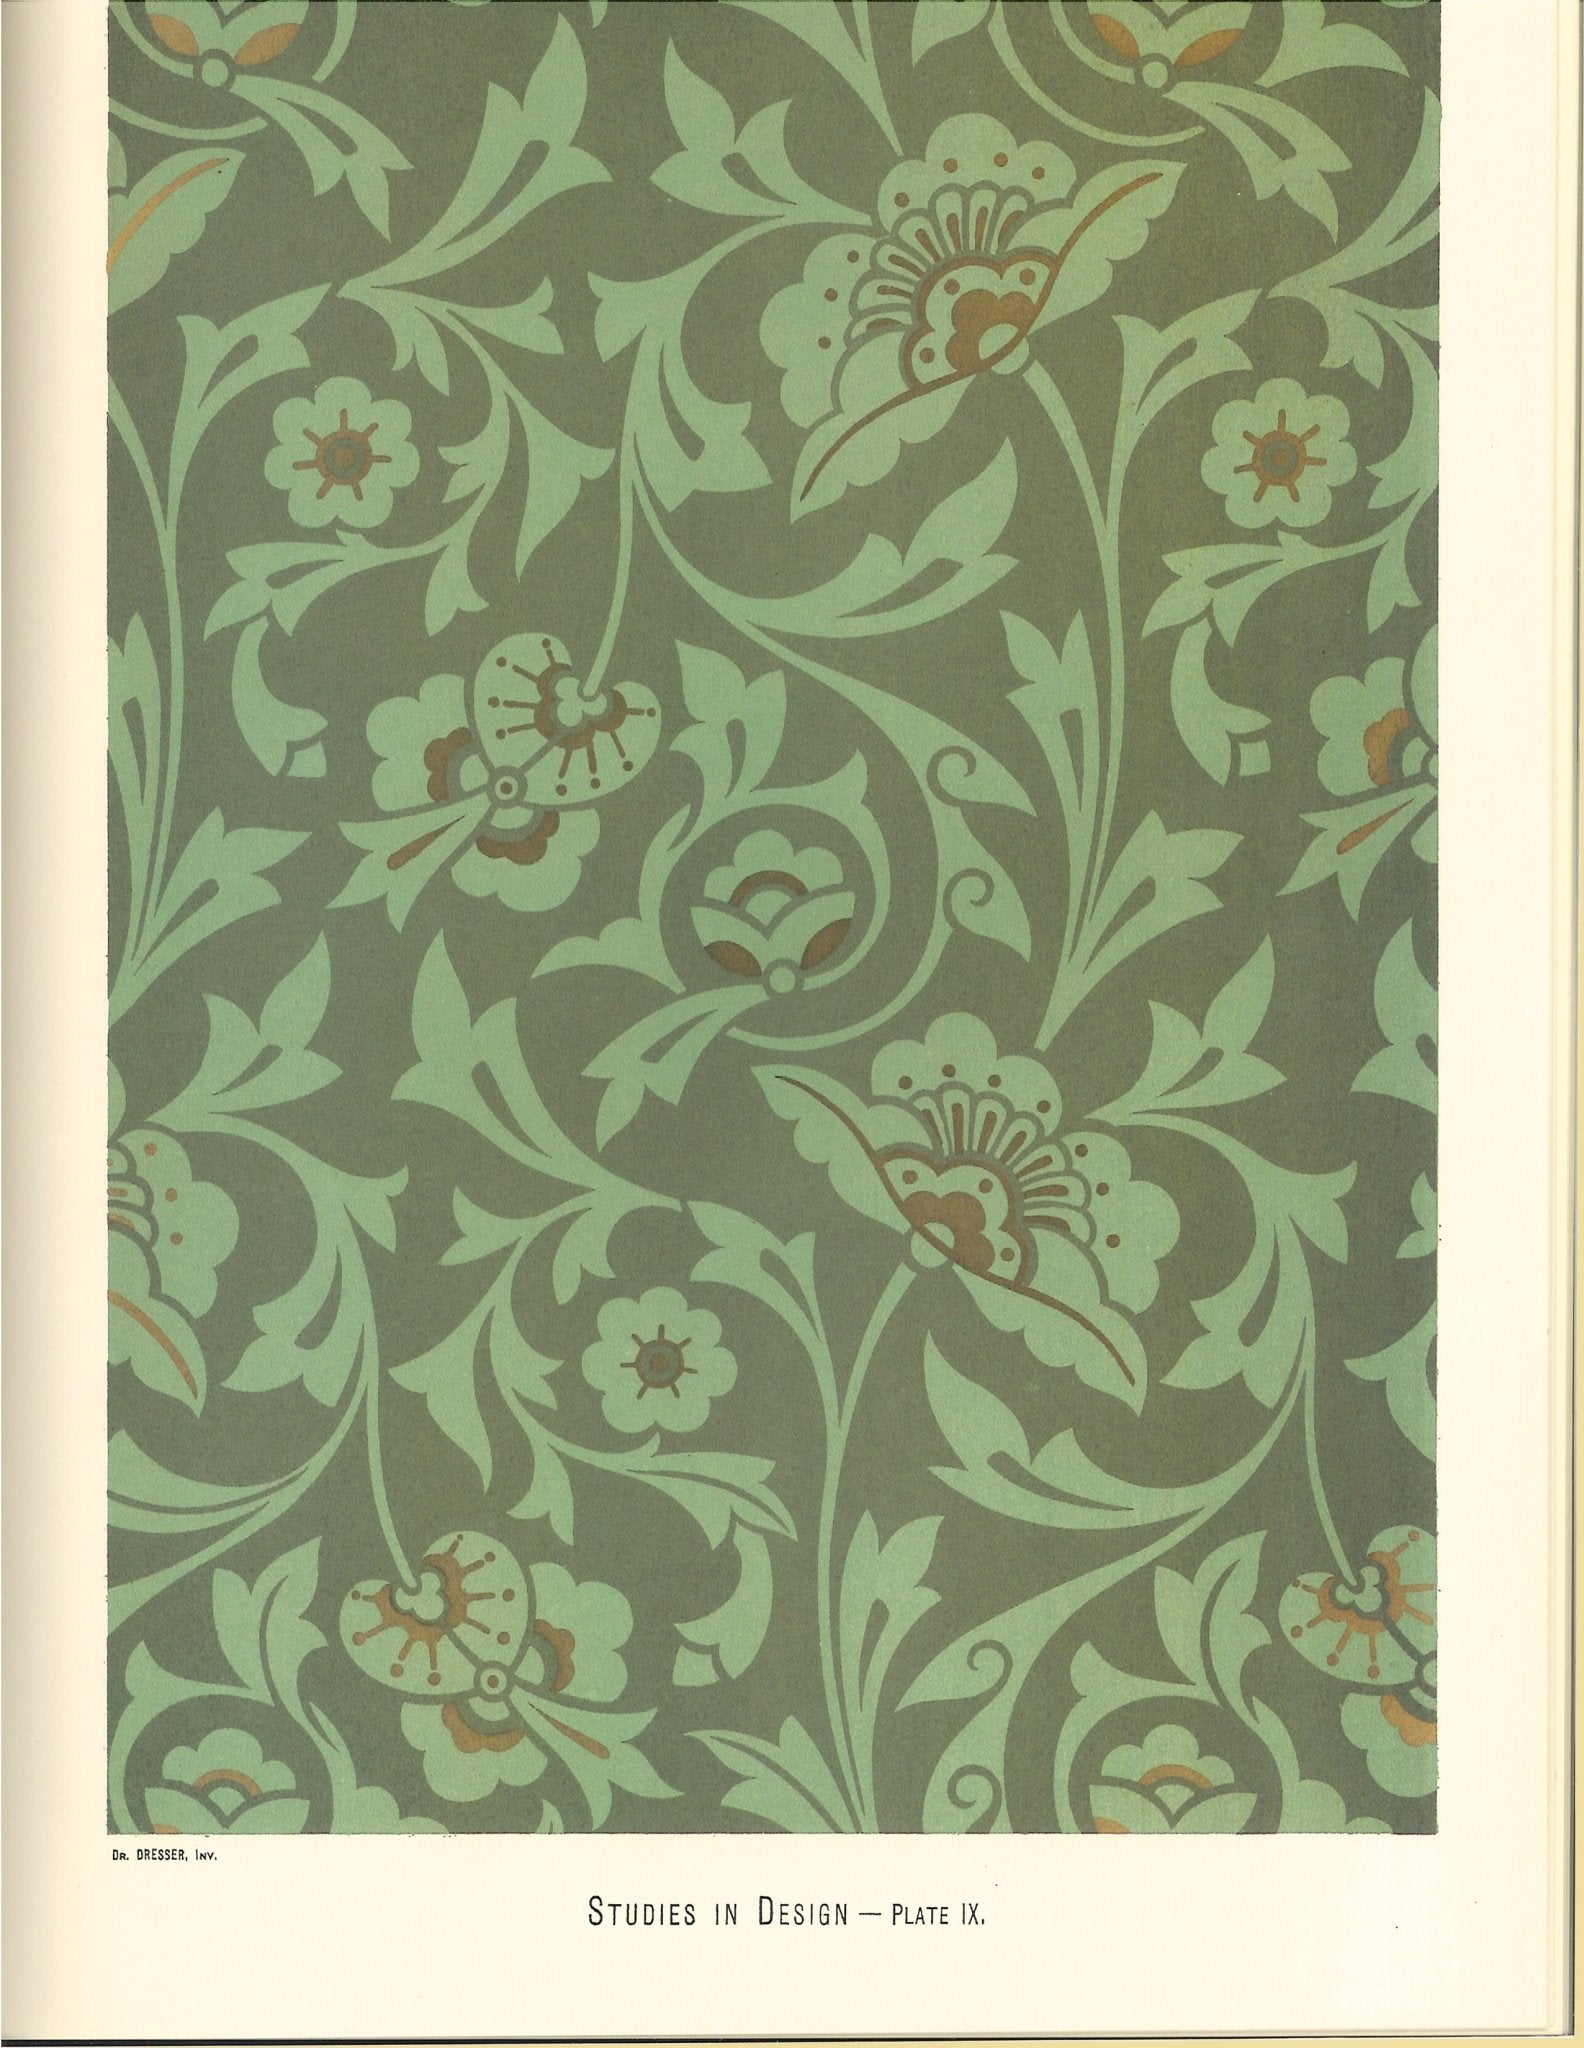 The source image for the All-Over-Floral Floorcloth Series from Christopher Dresser's Studies in Design, c.1875.